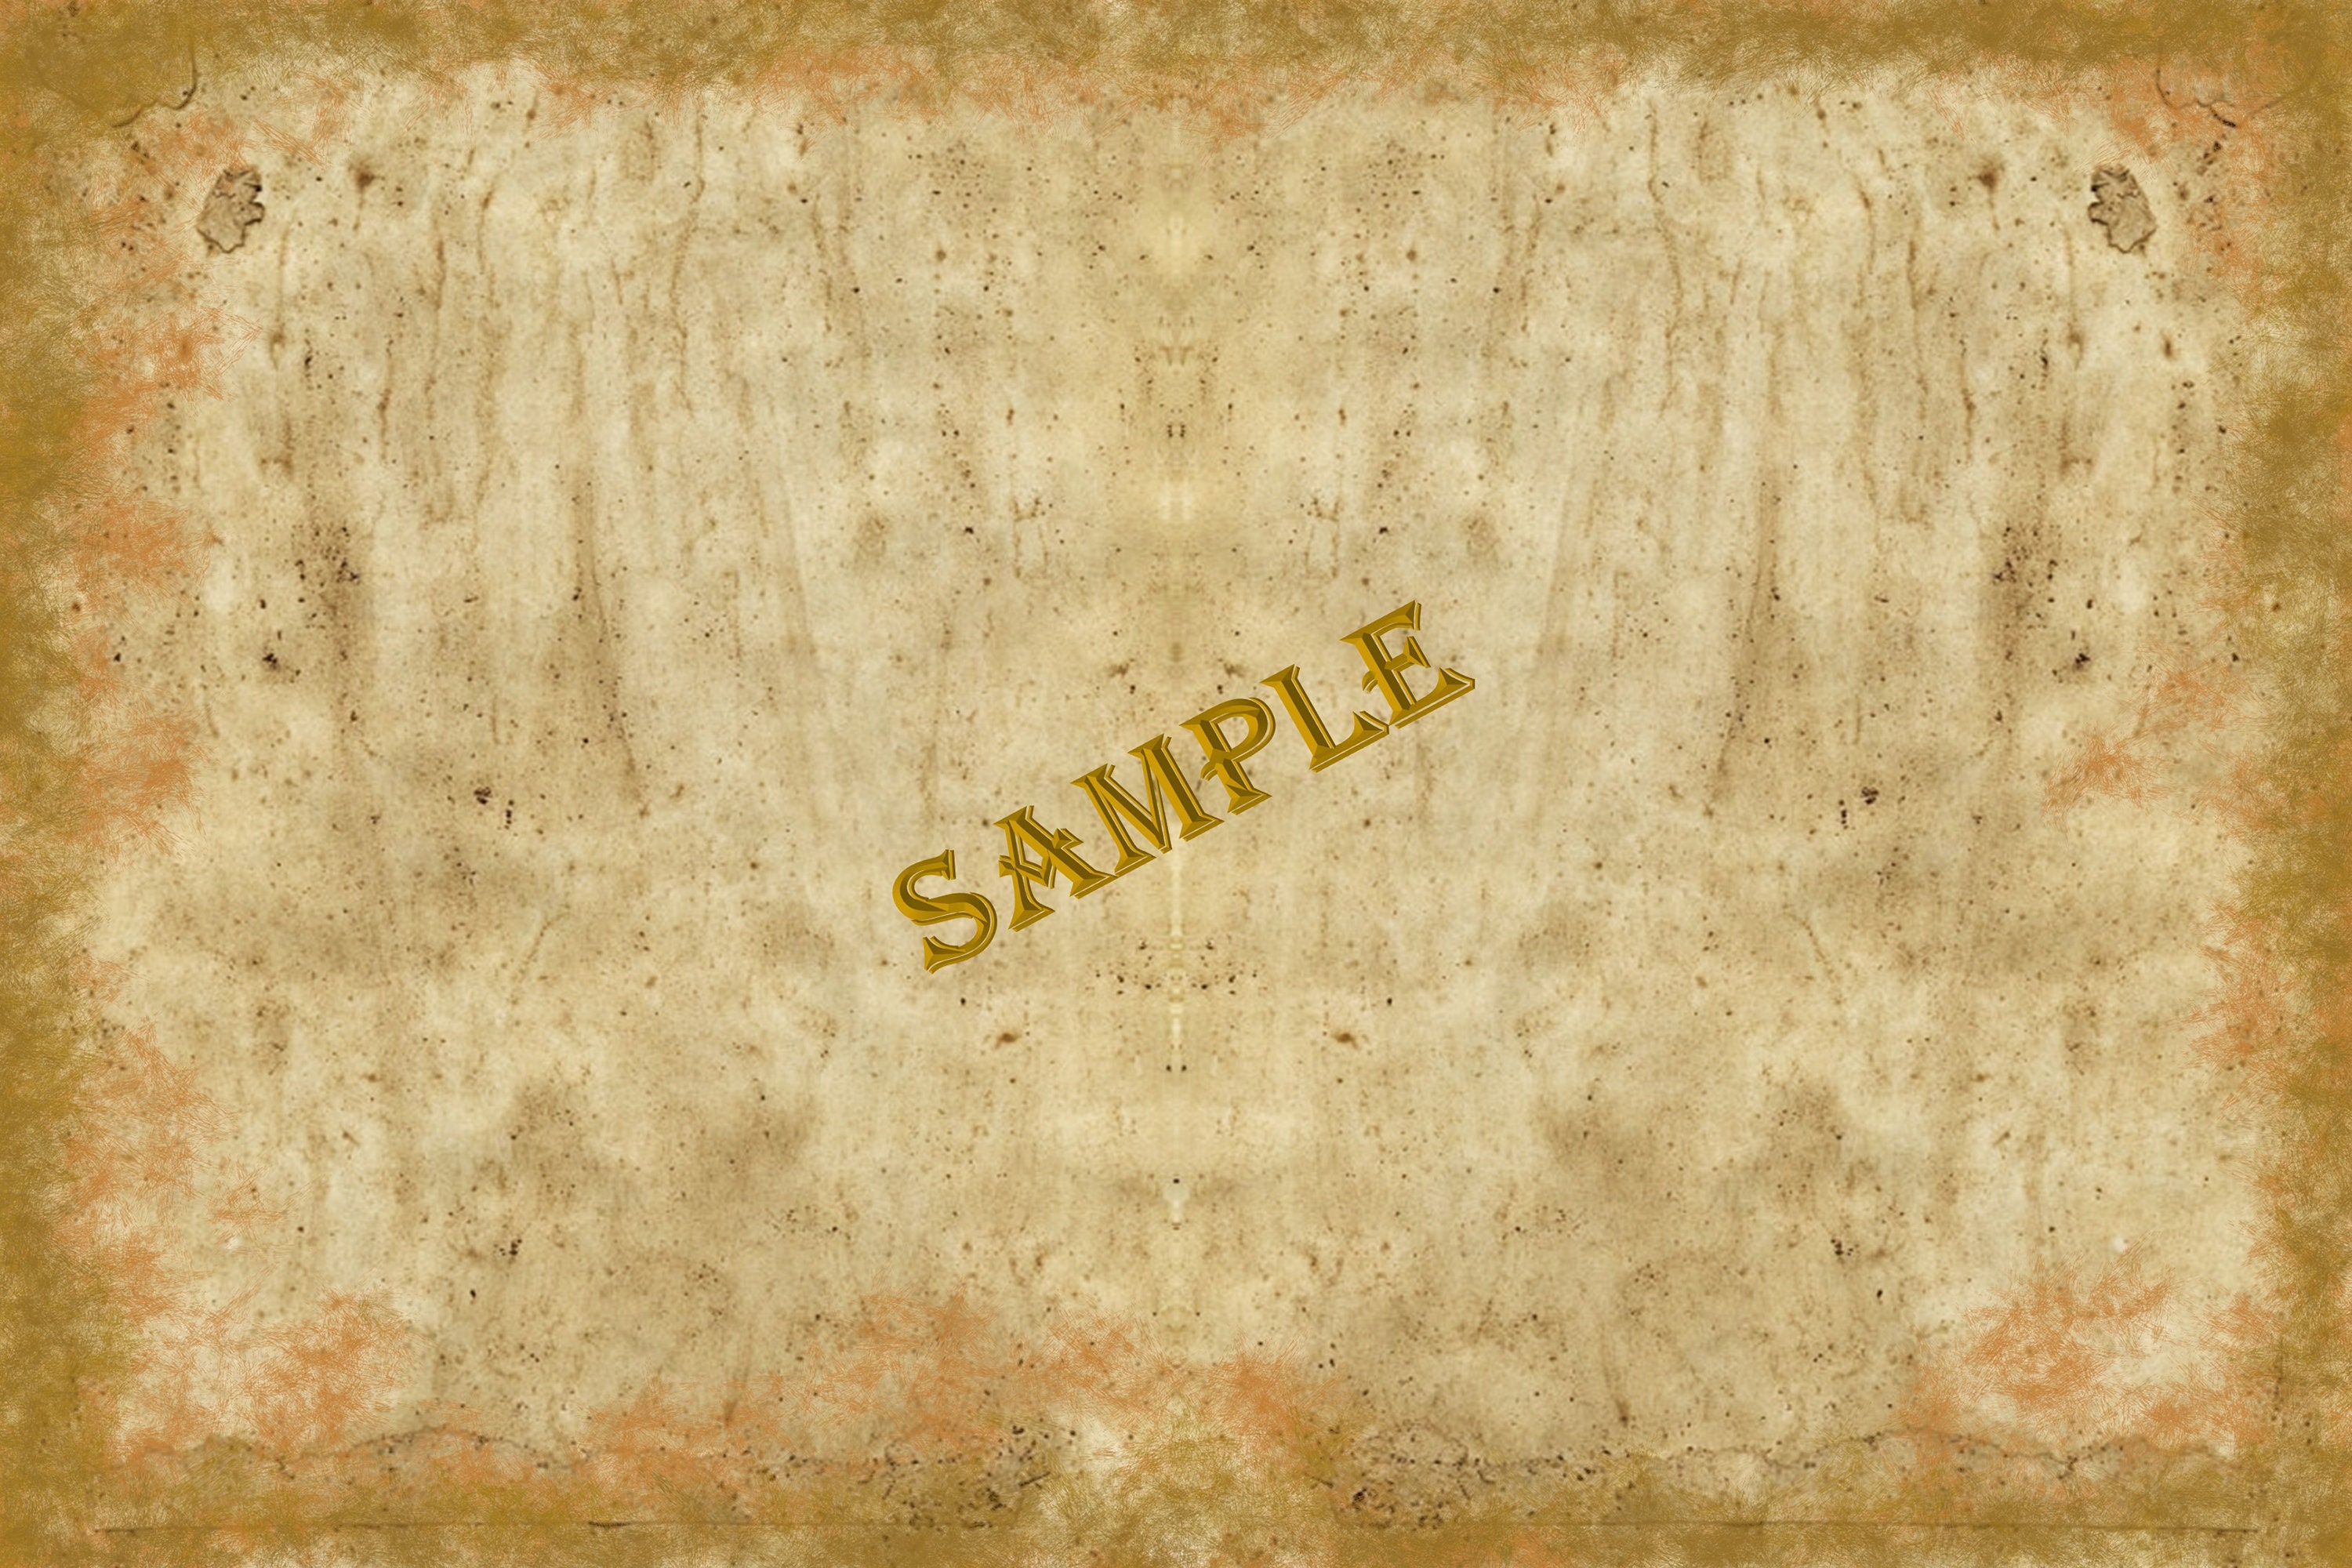 10 Vintage Tea Stained Backgrounds 8.5 x 11 inch Distressed Ideal for journal pages Grunge JPEG